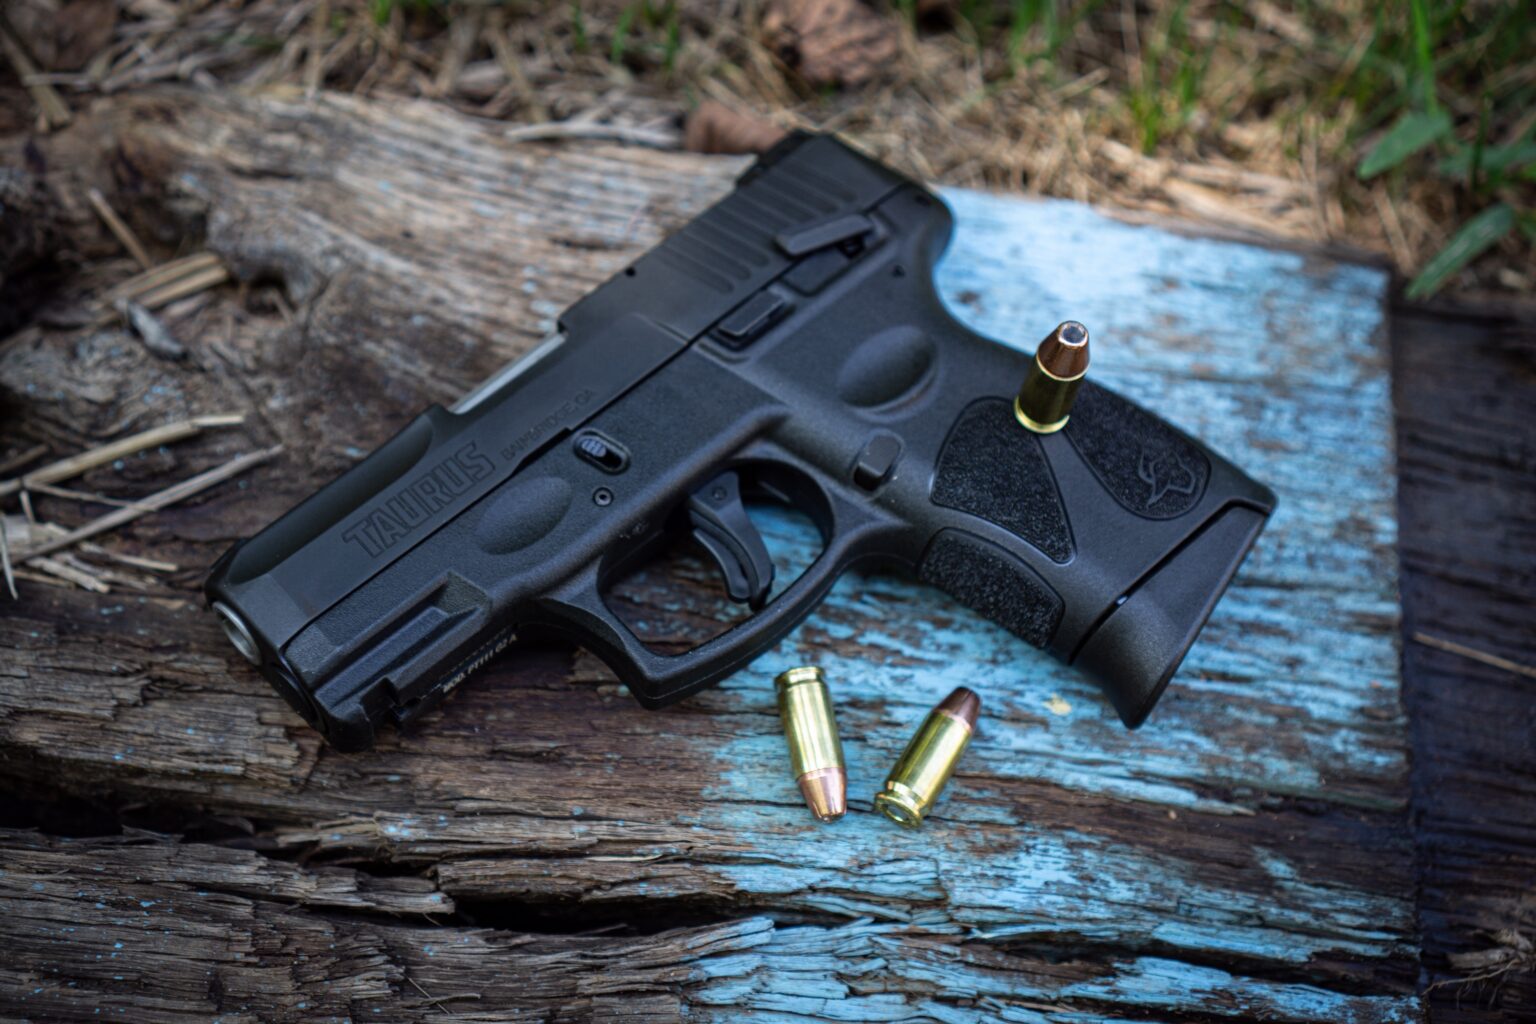 taurus-g2c-review-entry-level-ccw-potential